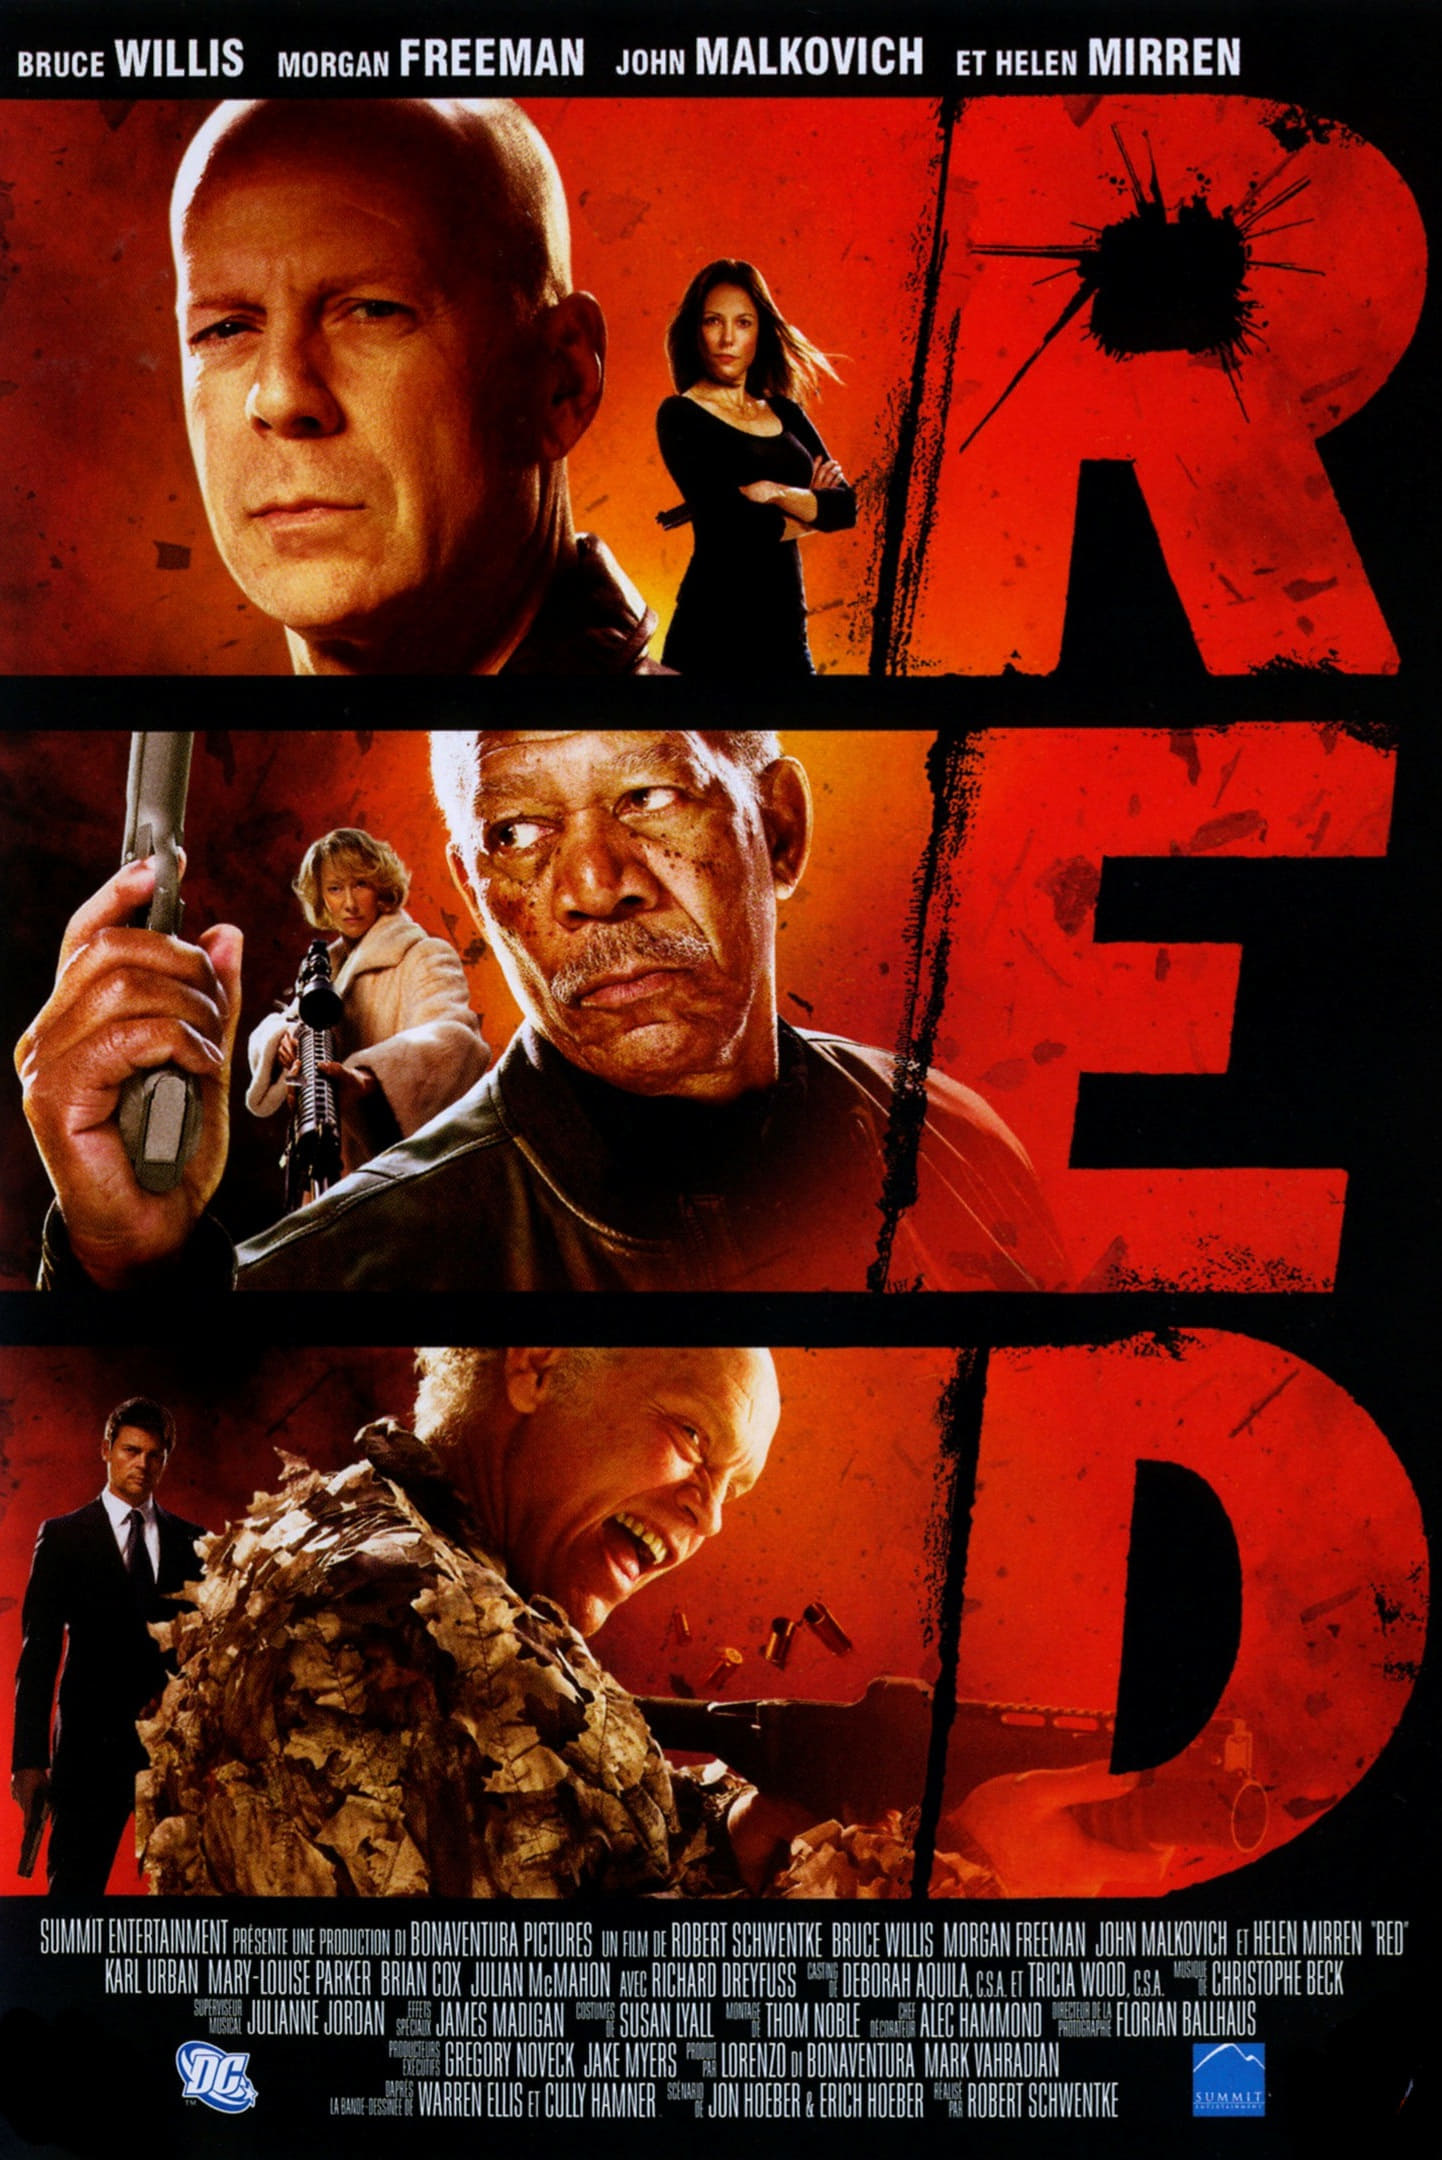 RED Movie poster